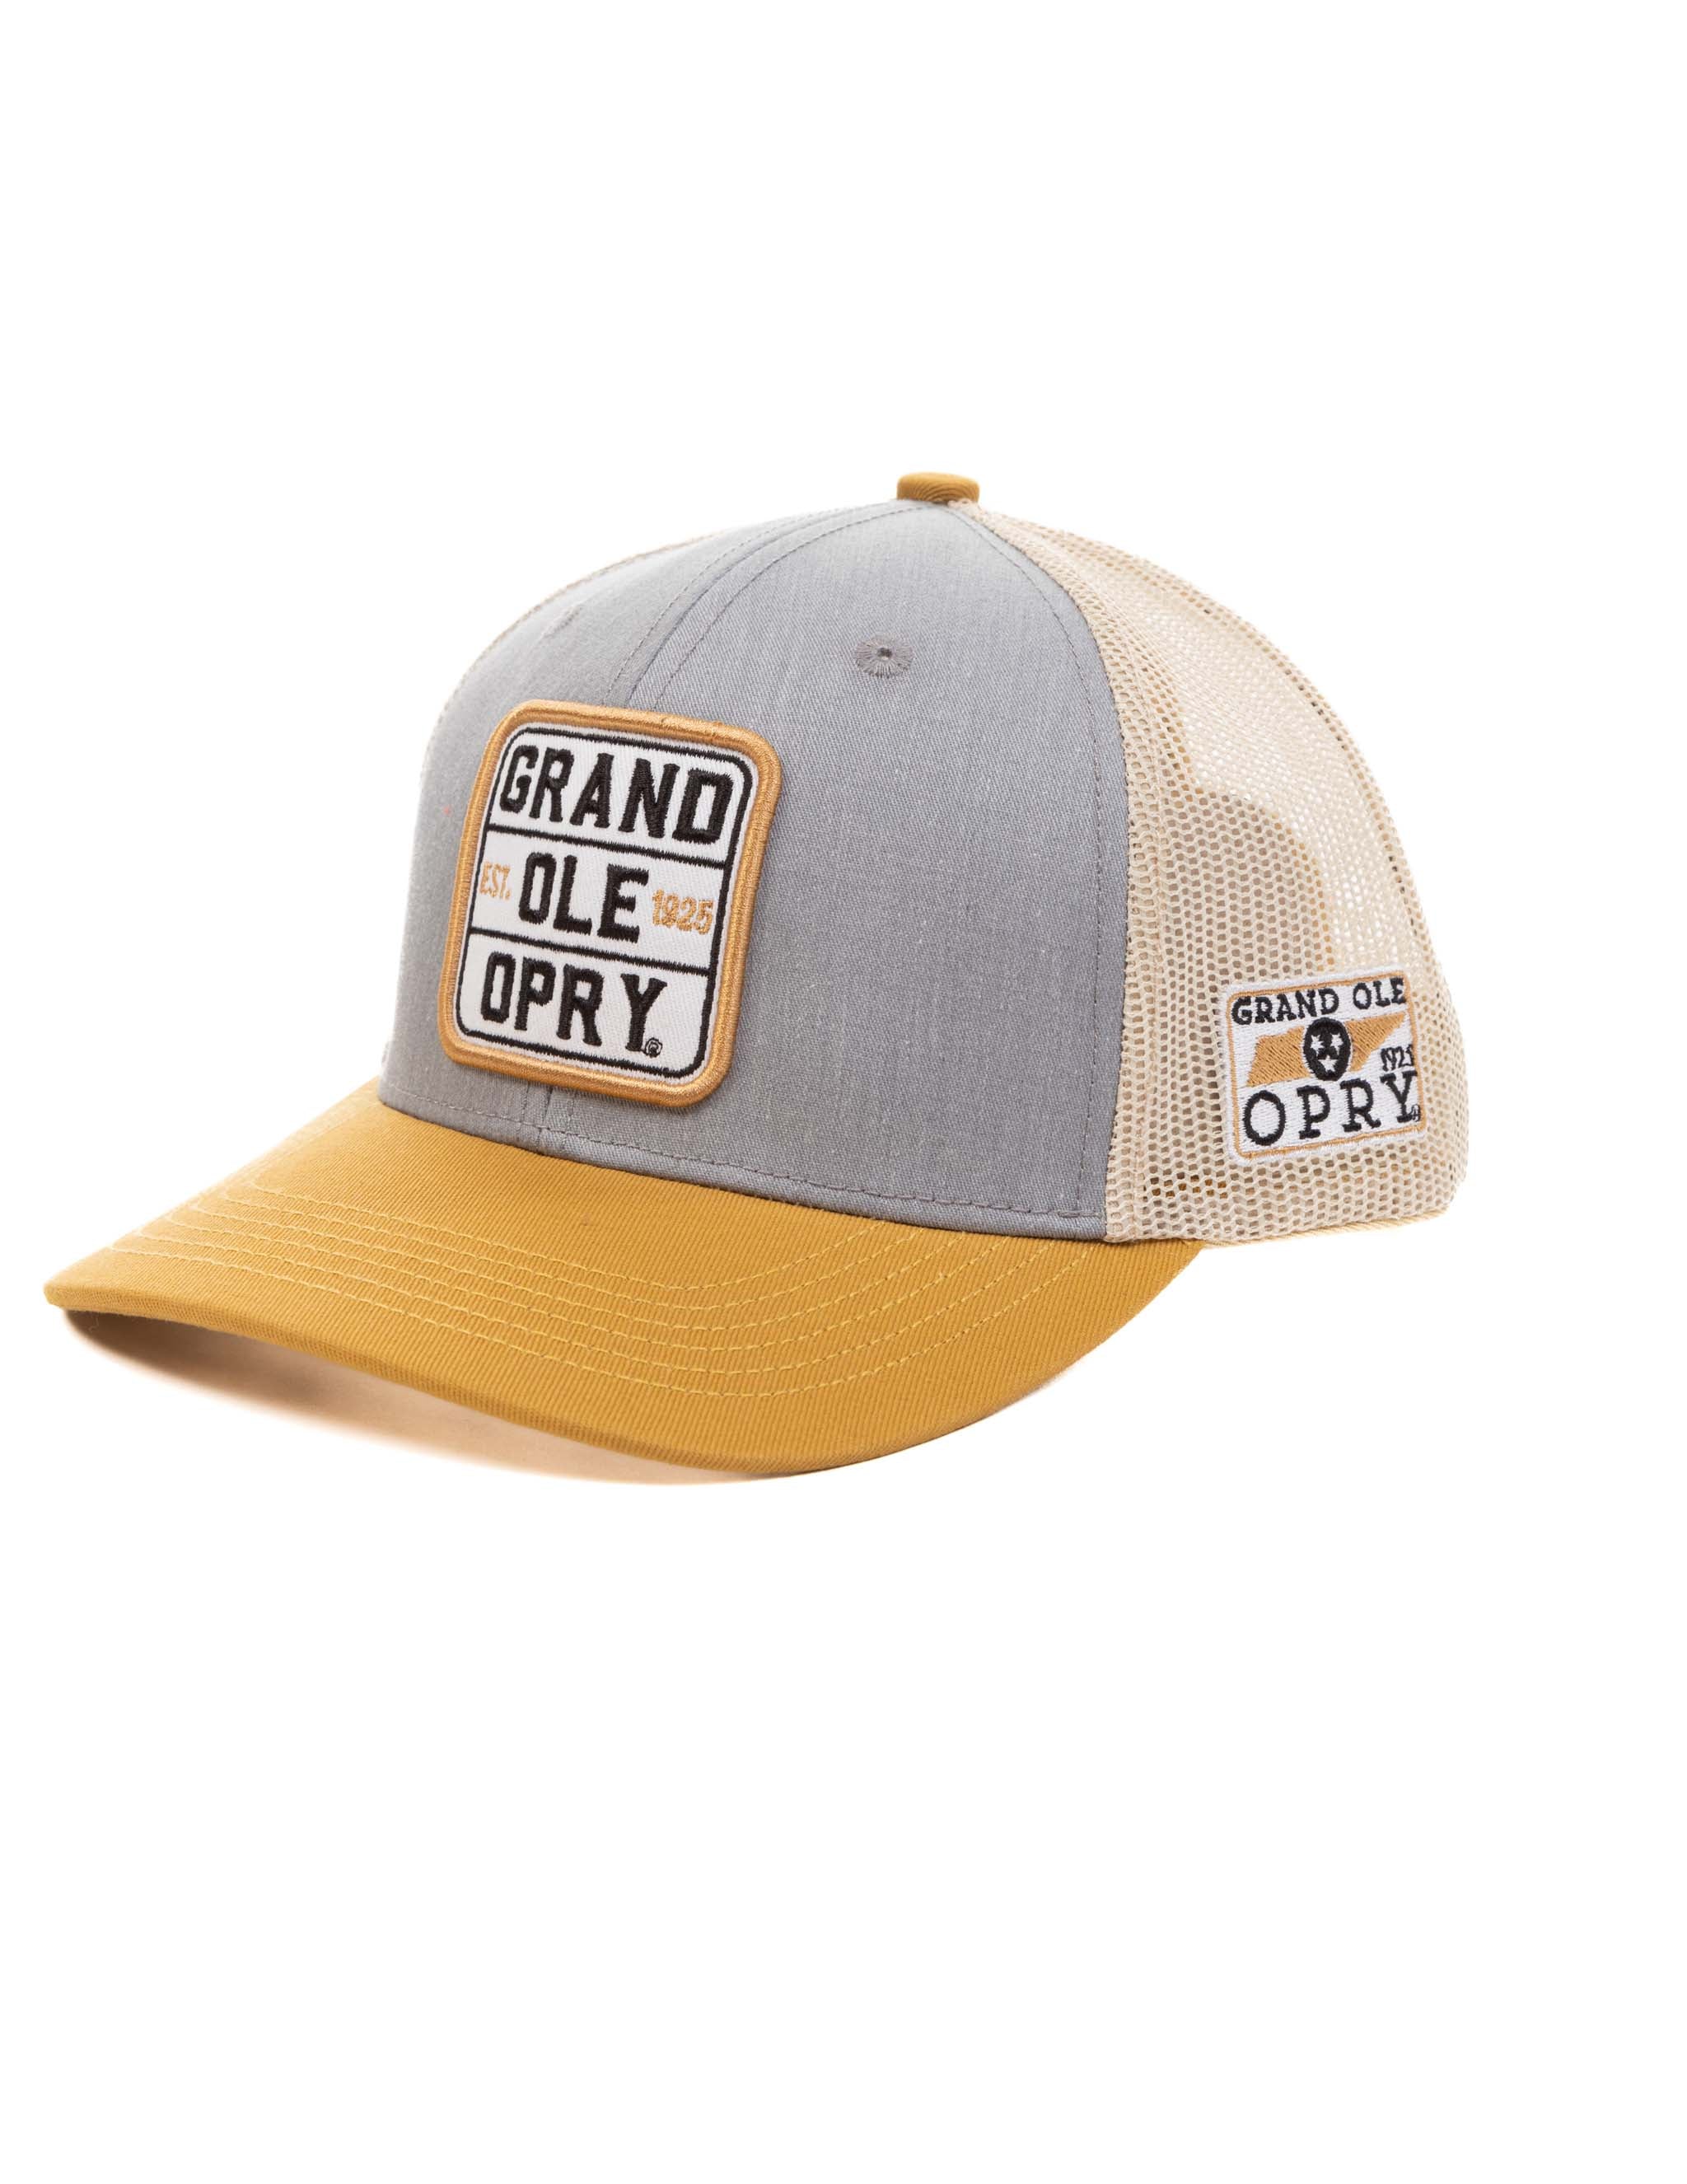 Opry Tricolor Patch Hat